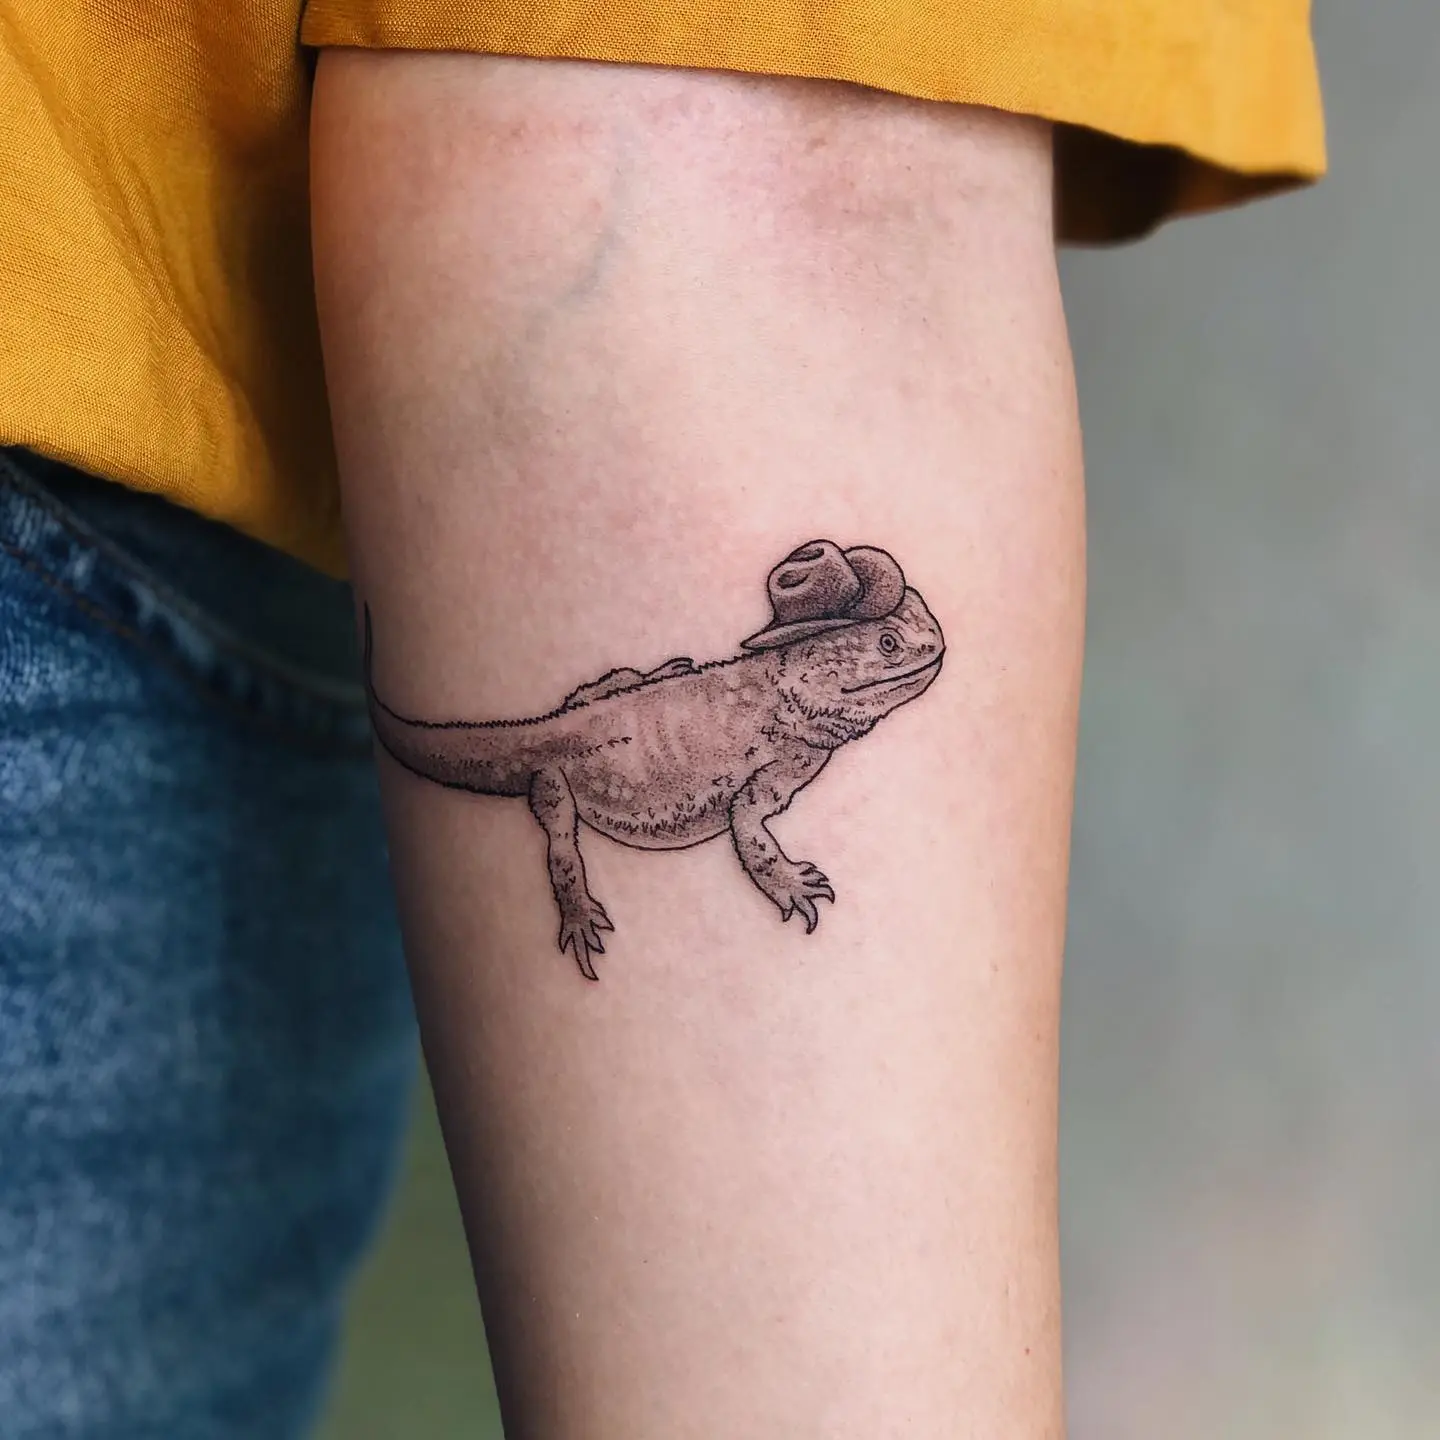 Paige ᜆᜎ  on Twitter Smaug the bearded dragon with echeveria amp  eucalyptus  A tattoo design for Martie Their beardie is missing a lil  bit of his tail Ill also have